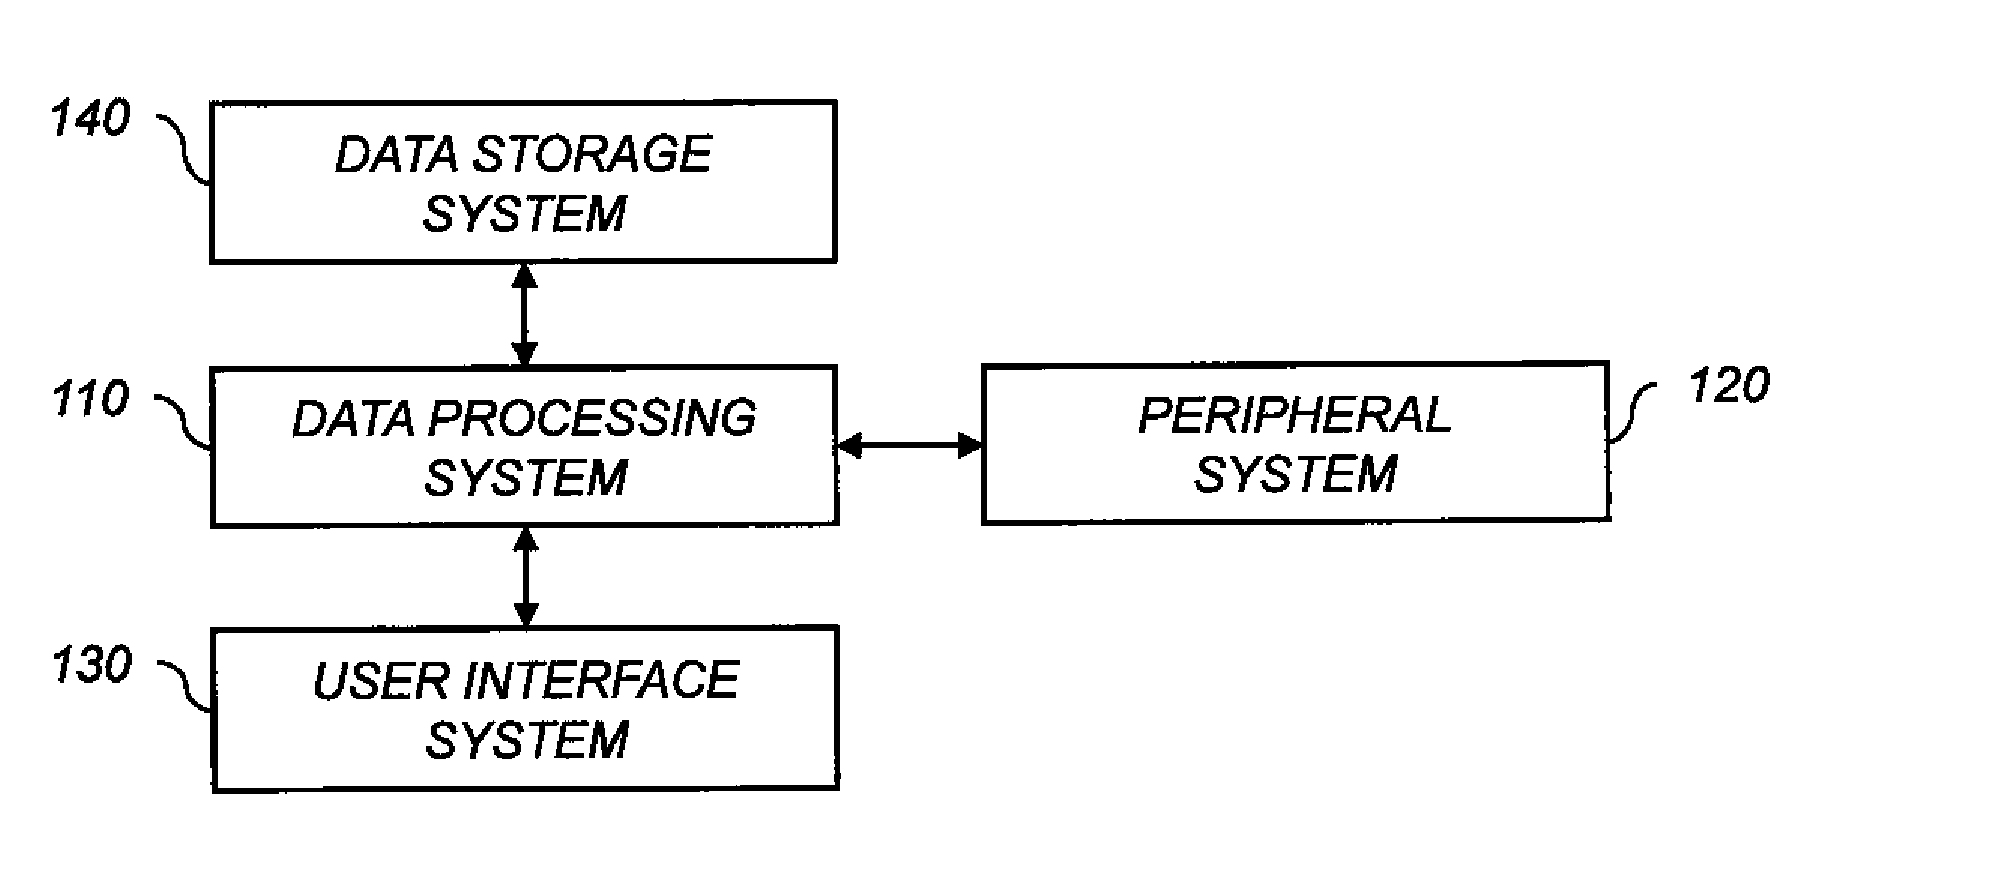 Method for providing a stabilized video sequence